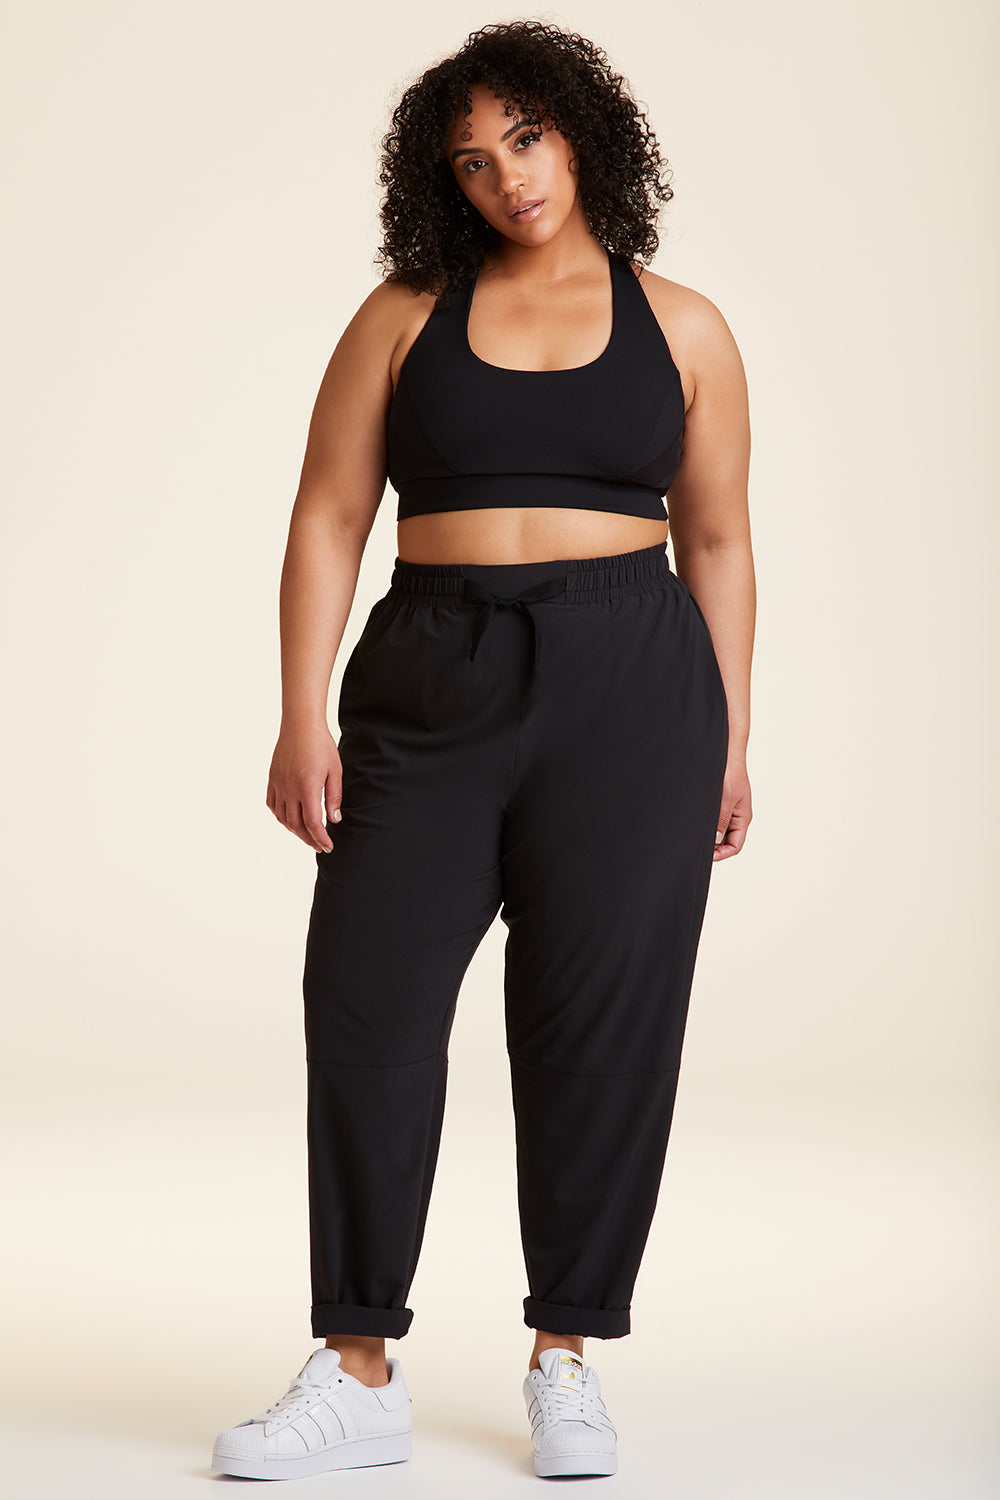 High Waisted Pants For Women, Plus Size